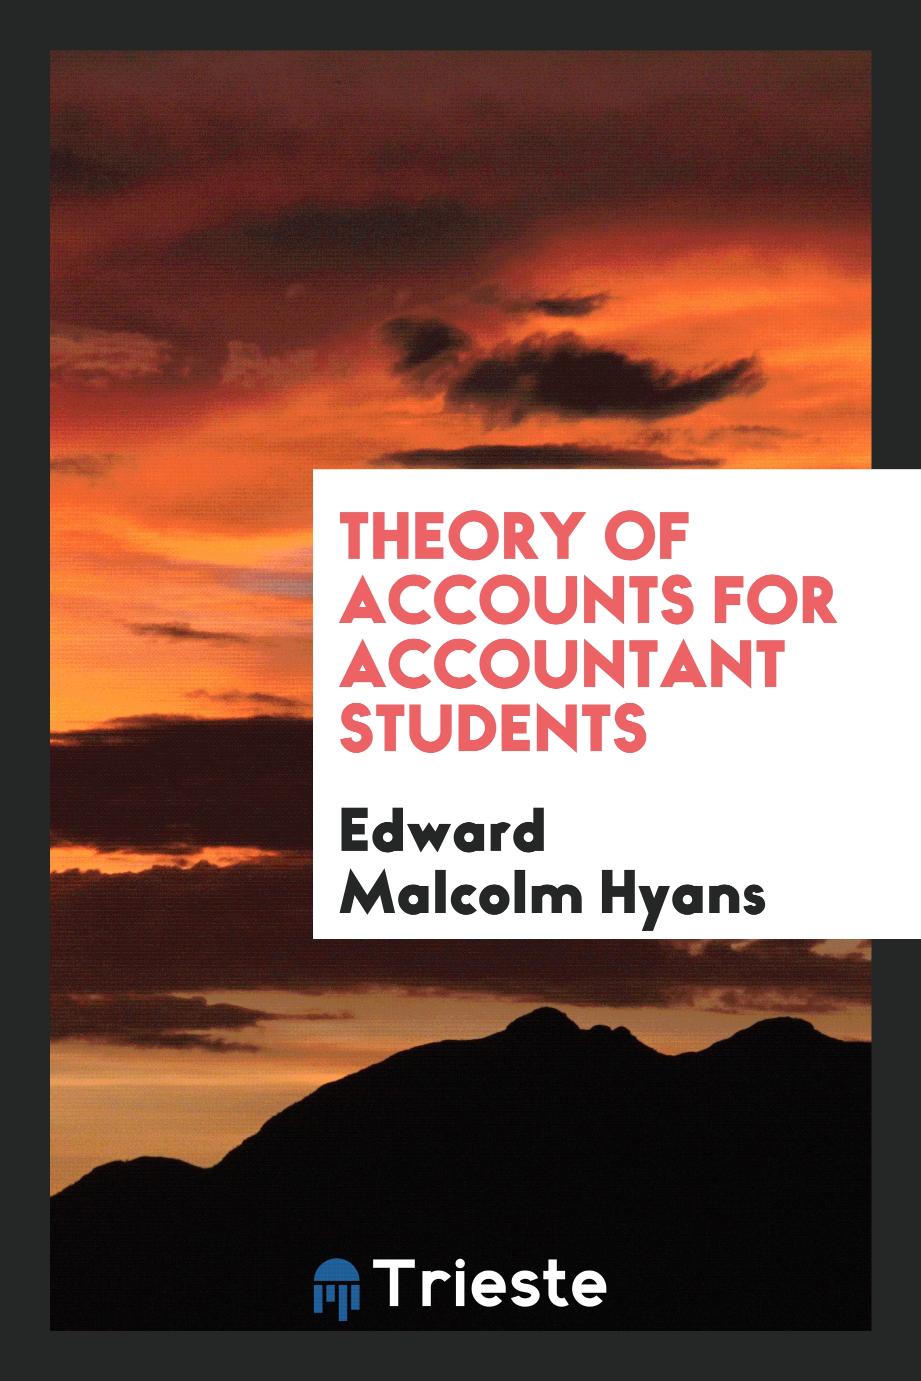 Theory of accounts for accountant students